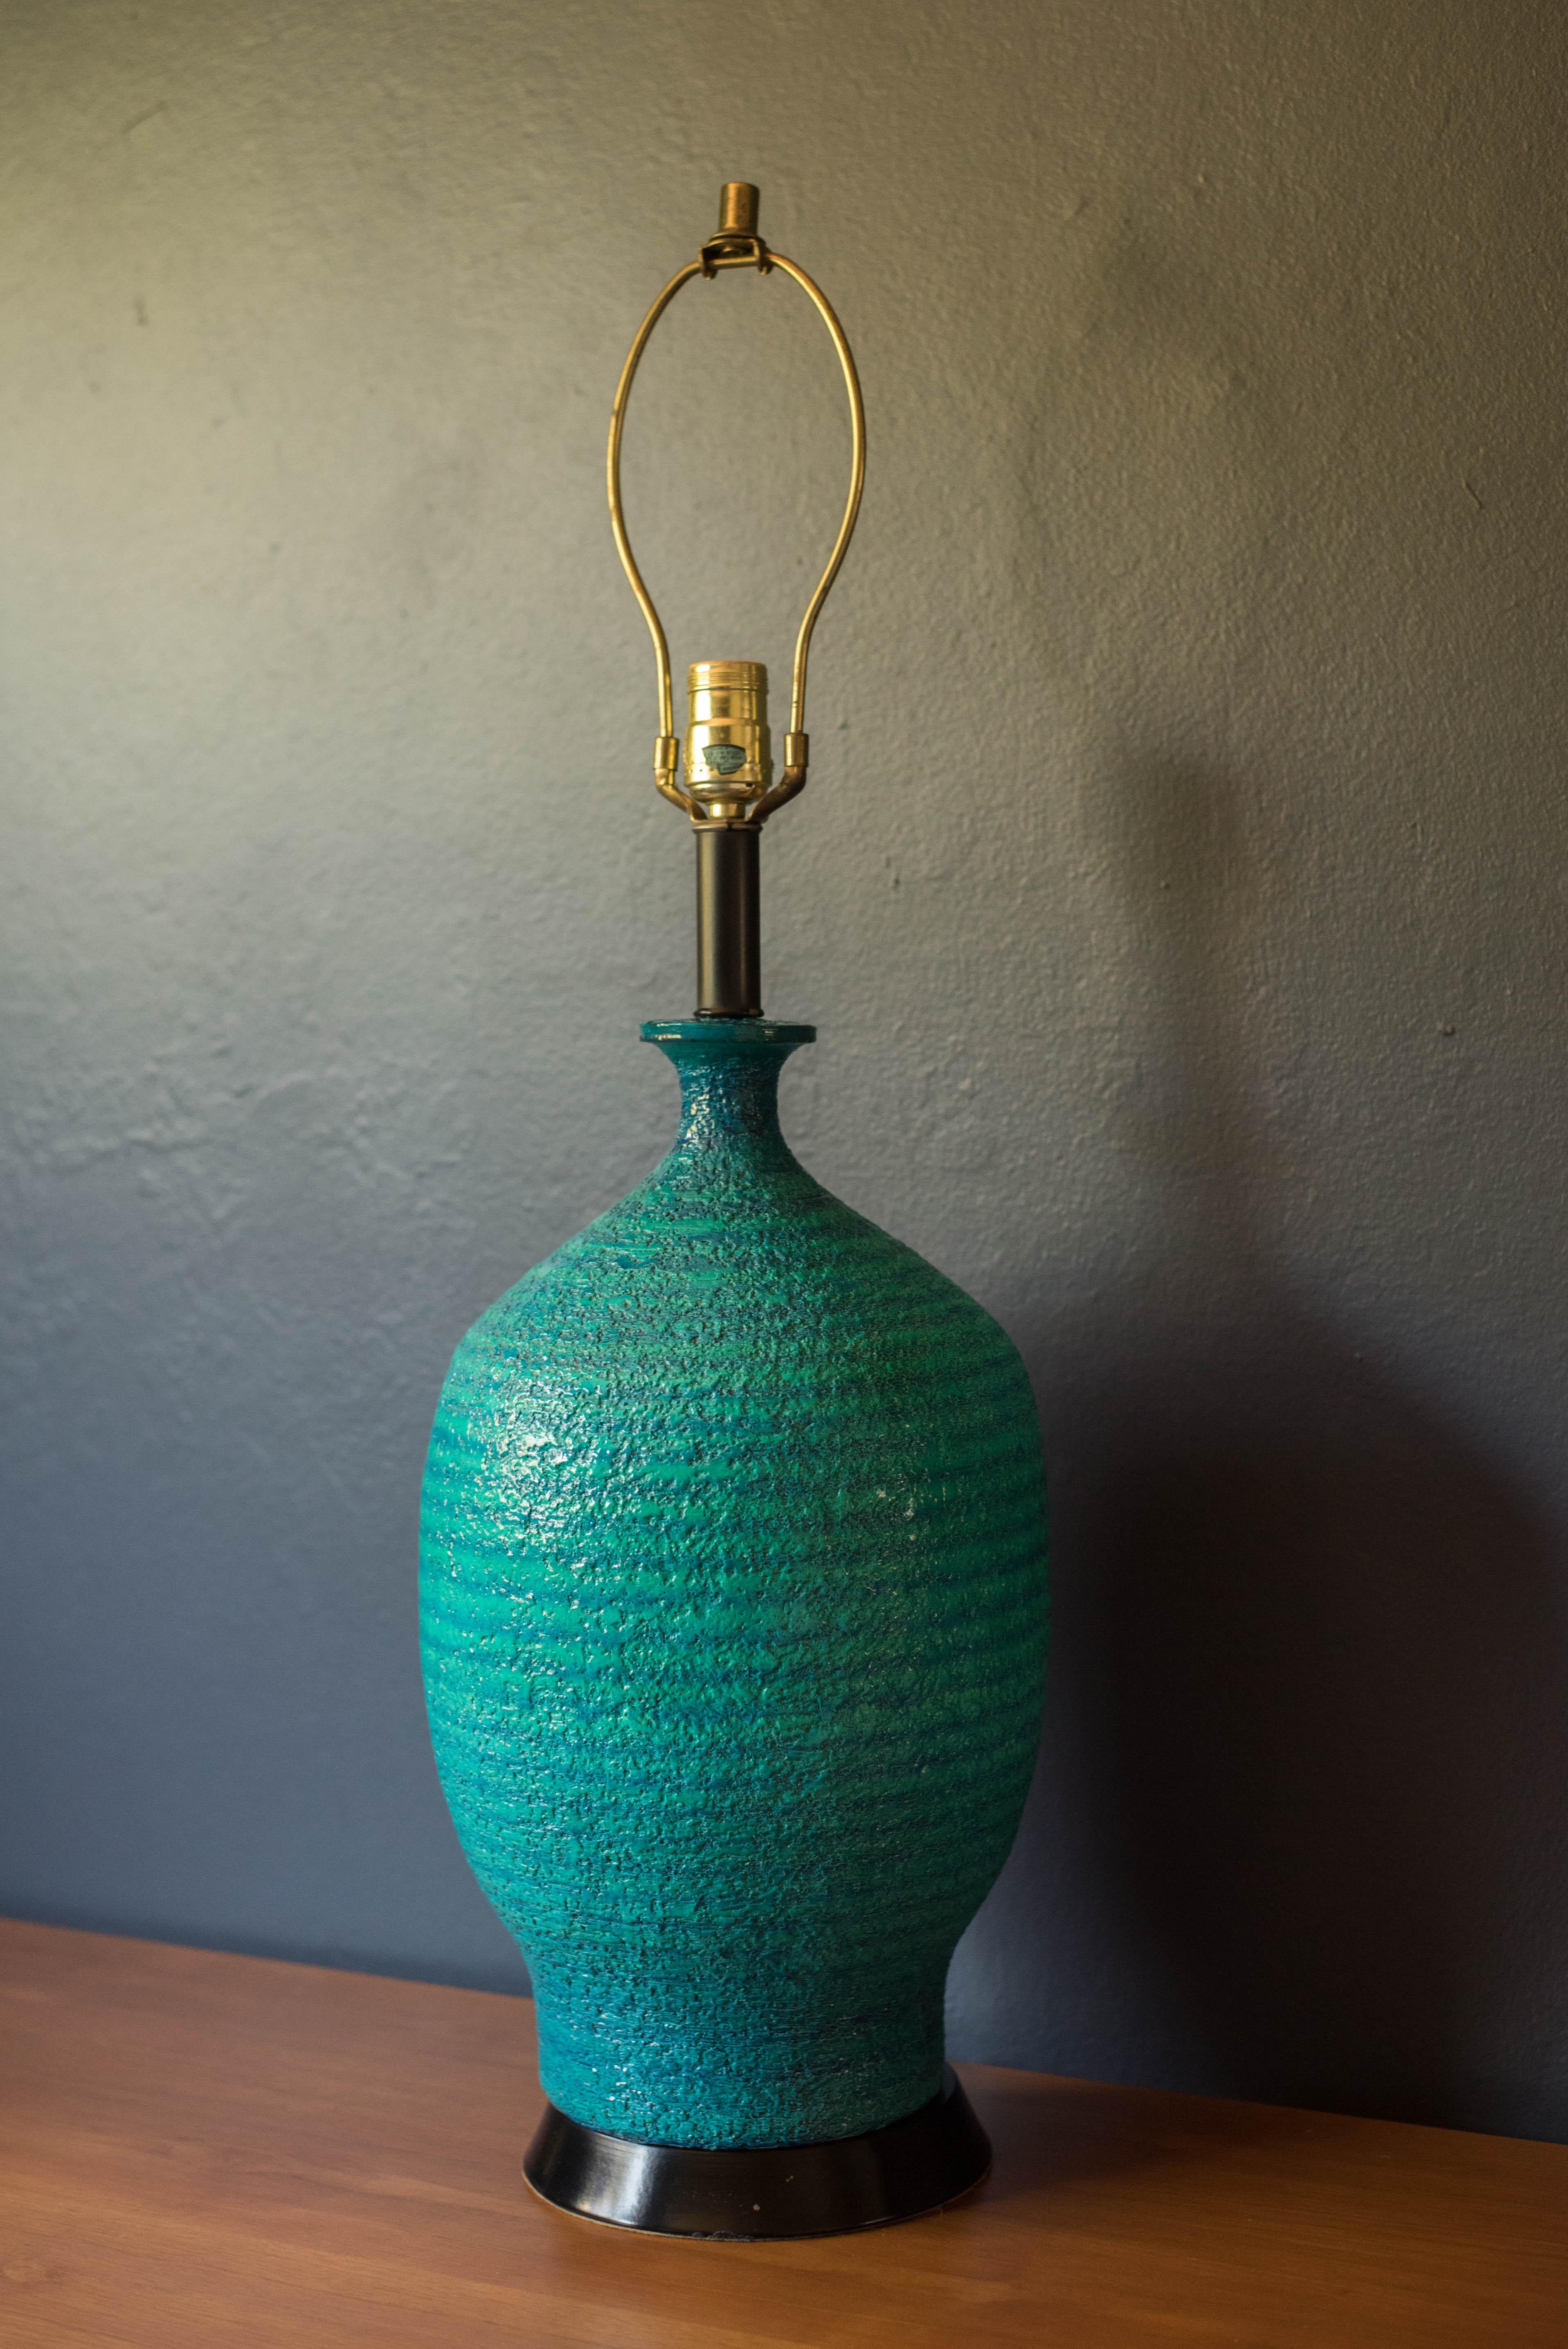 Vintage ceramic pottery table lamp circa 1960's. This piece features a vibrant mixture of blue and green with a textured glaze finish. Functions with a three way switch to emit a soft or brighter glow. Shade is not included.
